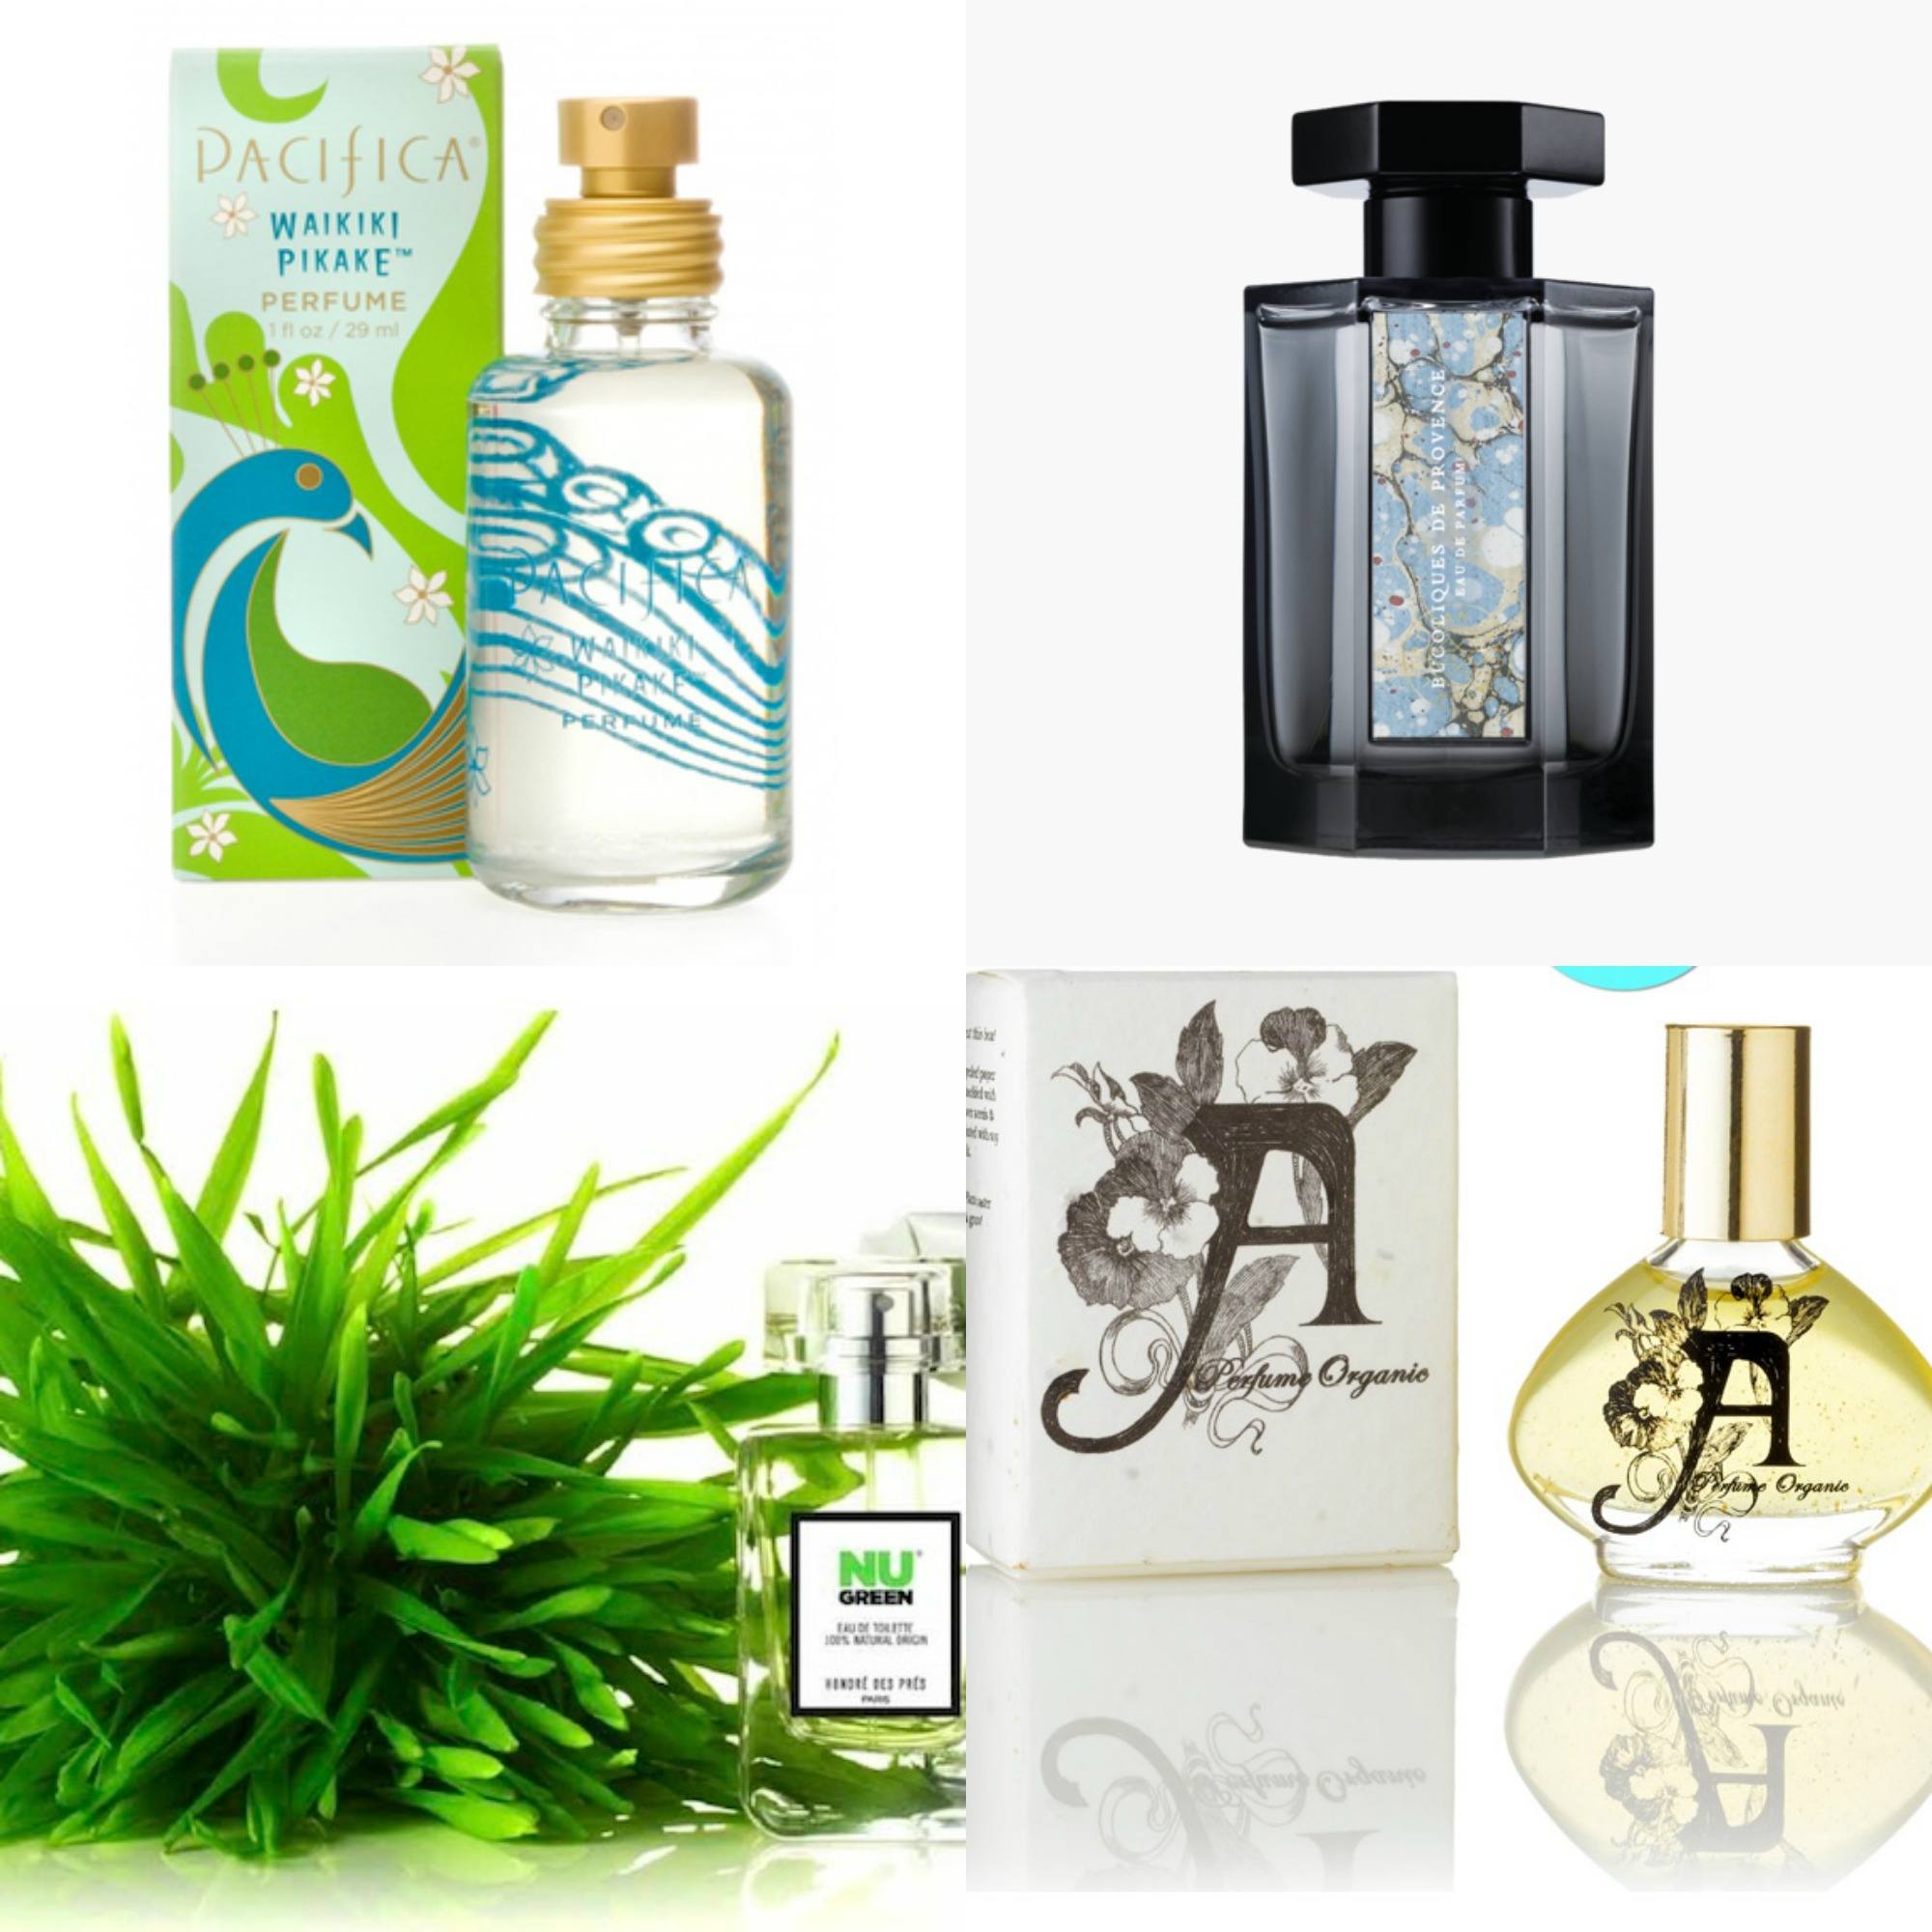 Alcohol Free Perfume Brands-Top 10 Perfumes without Alcohol These Days